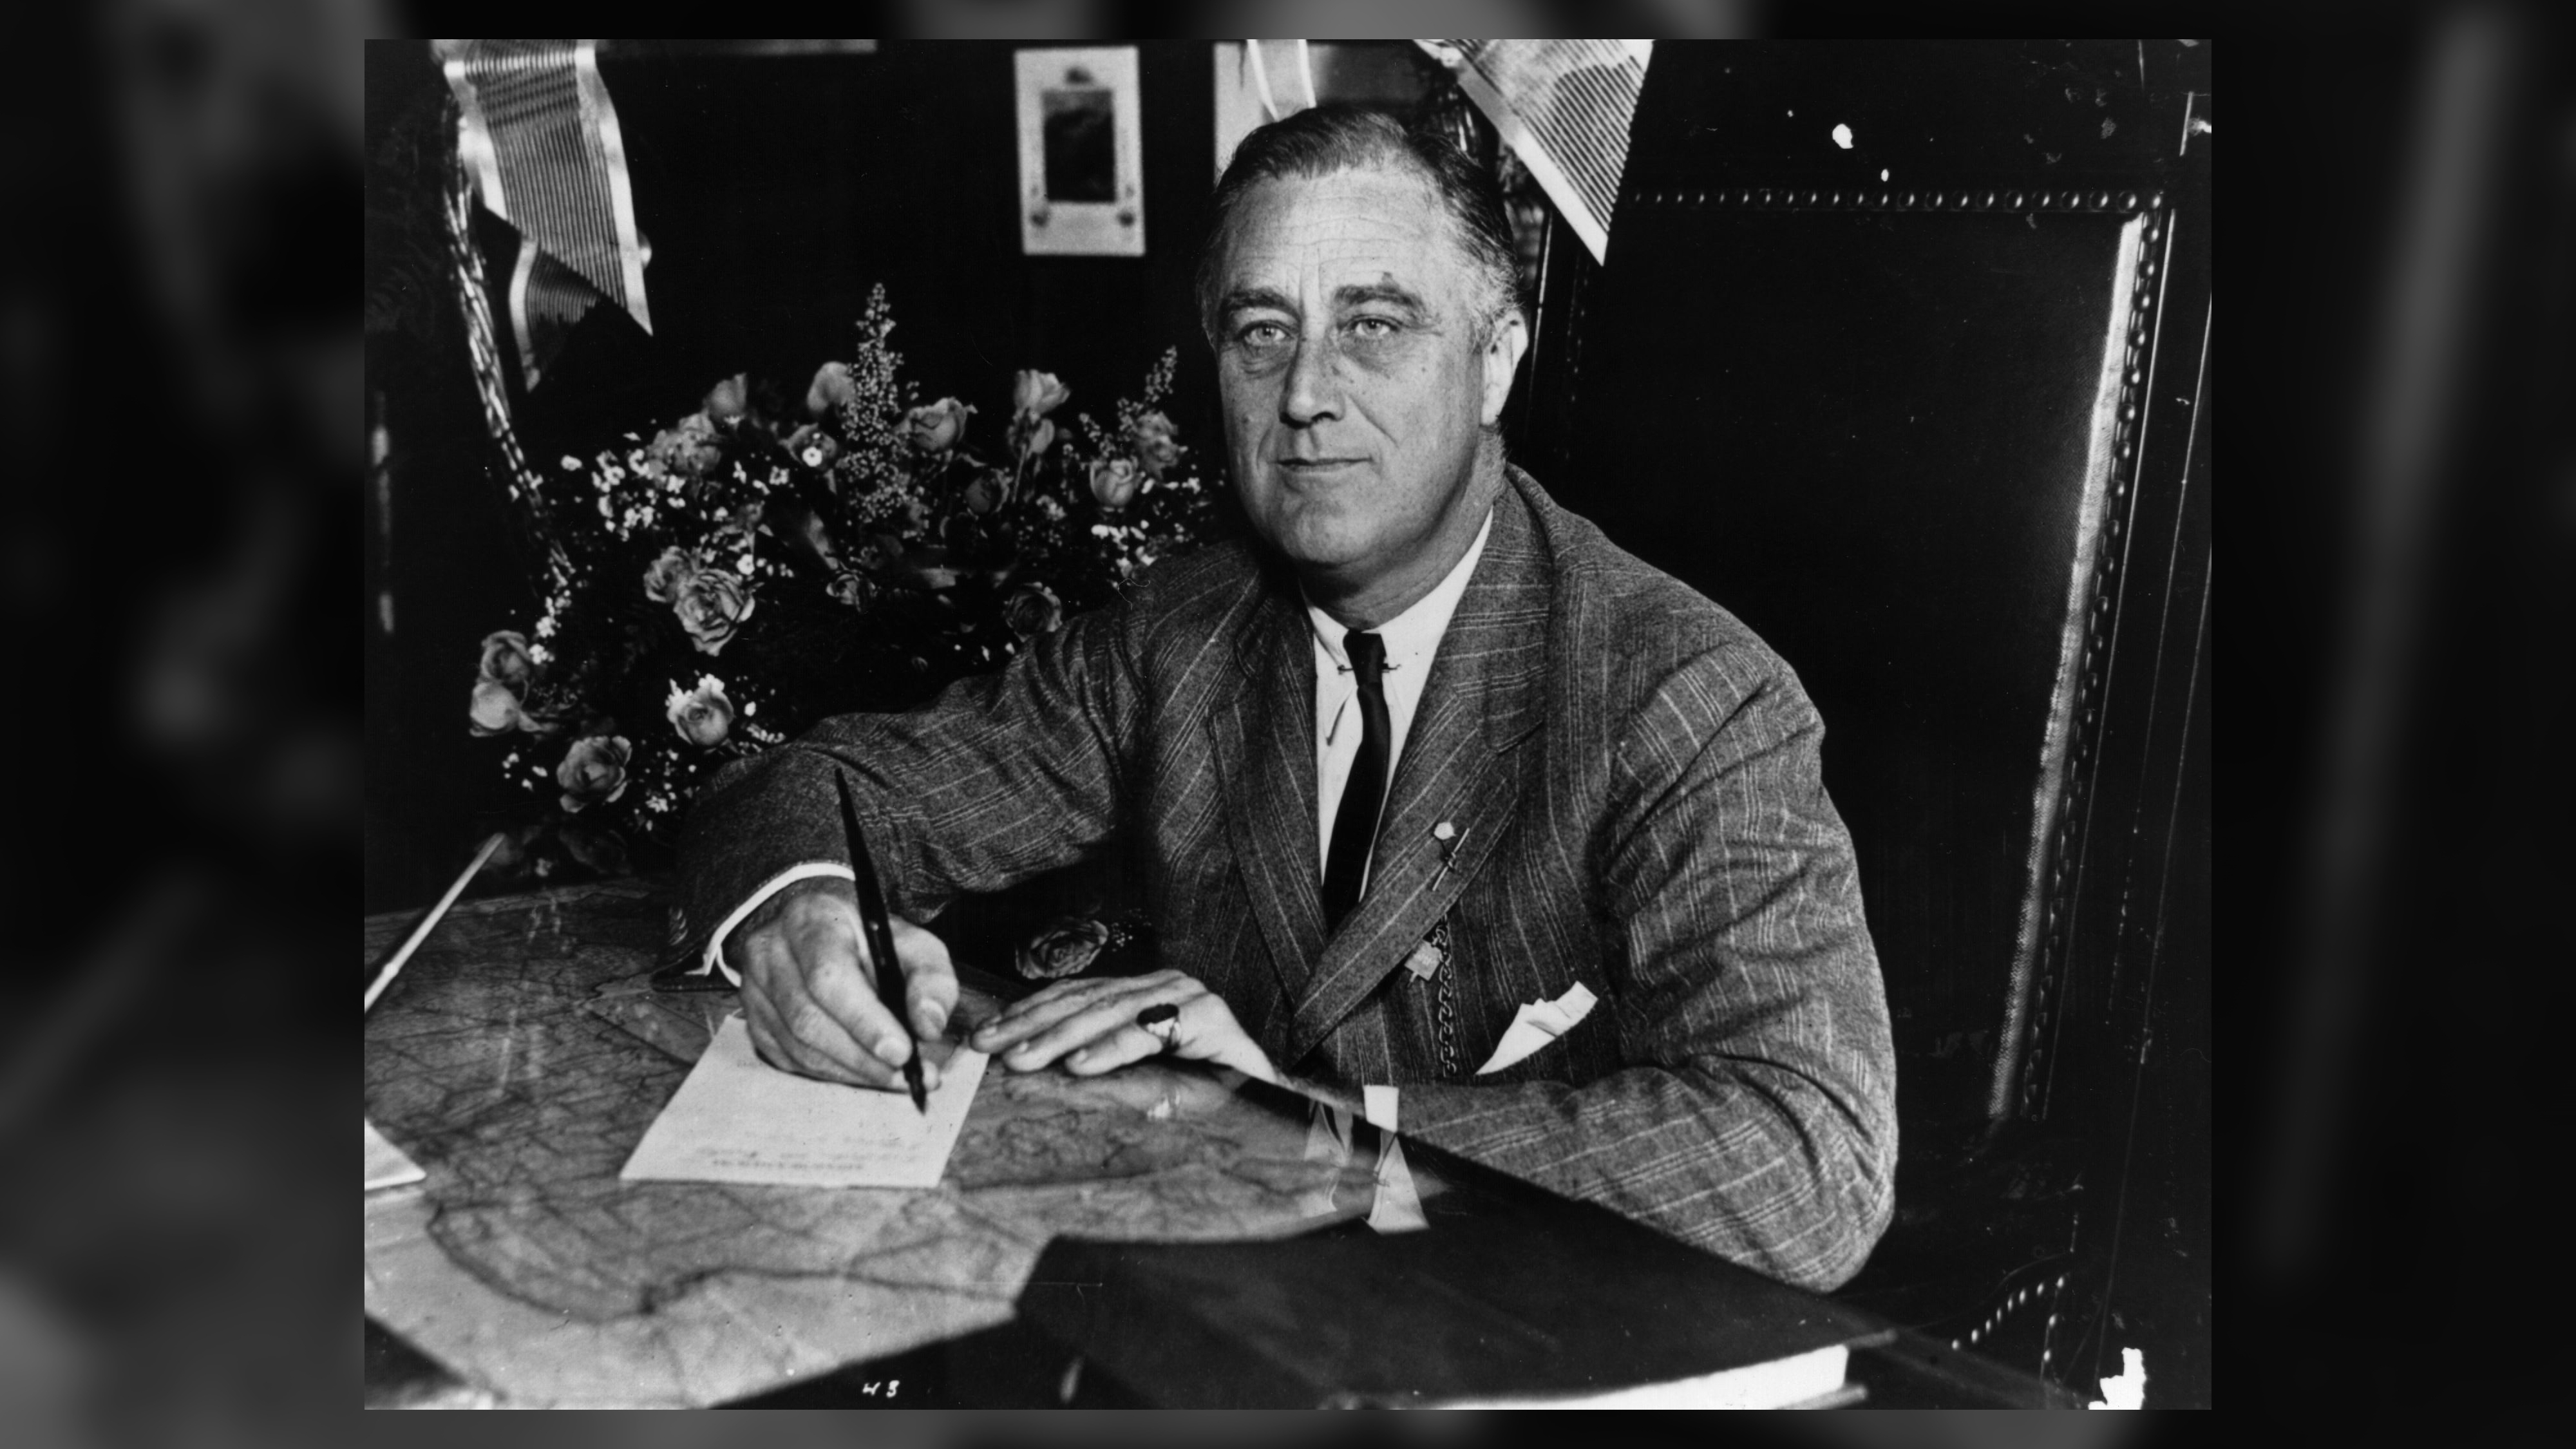 Black and white image of FDR signing a document at a desk